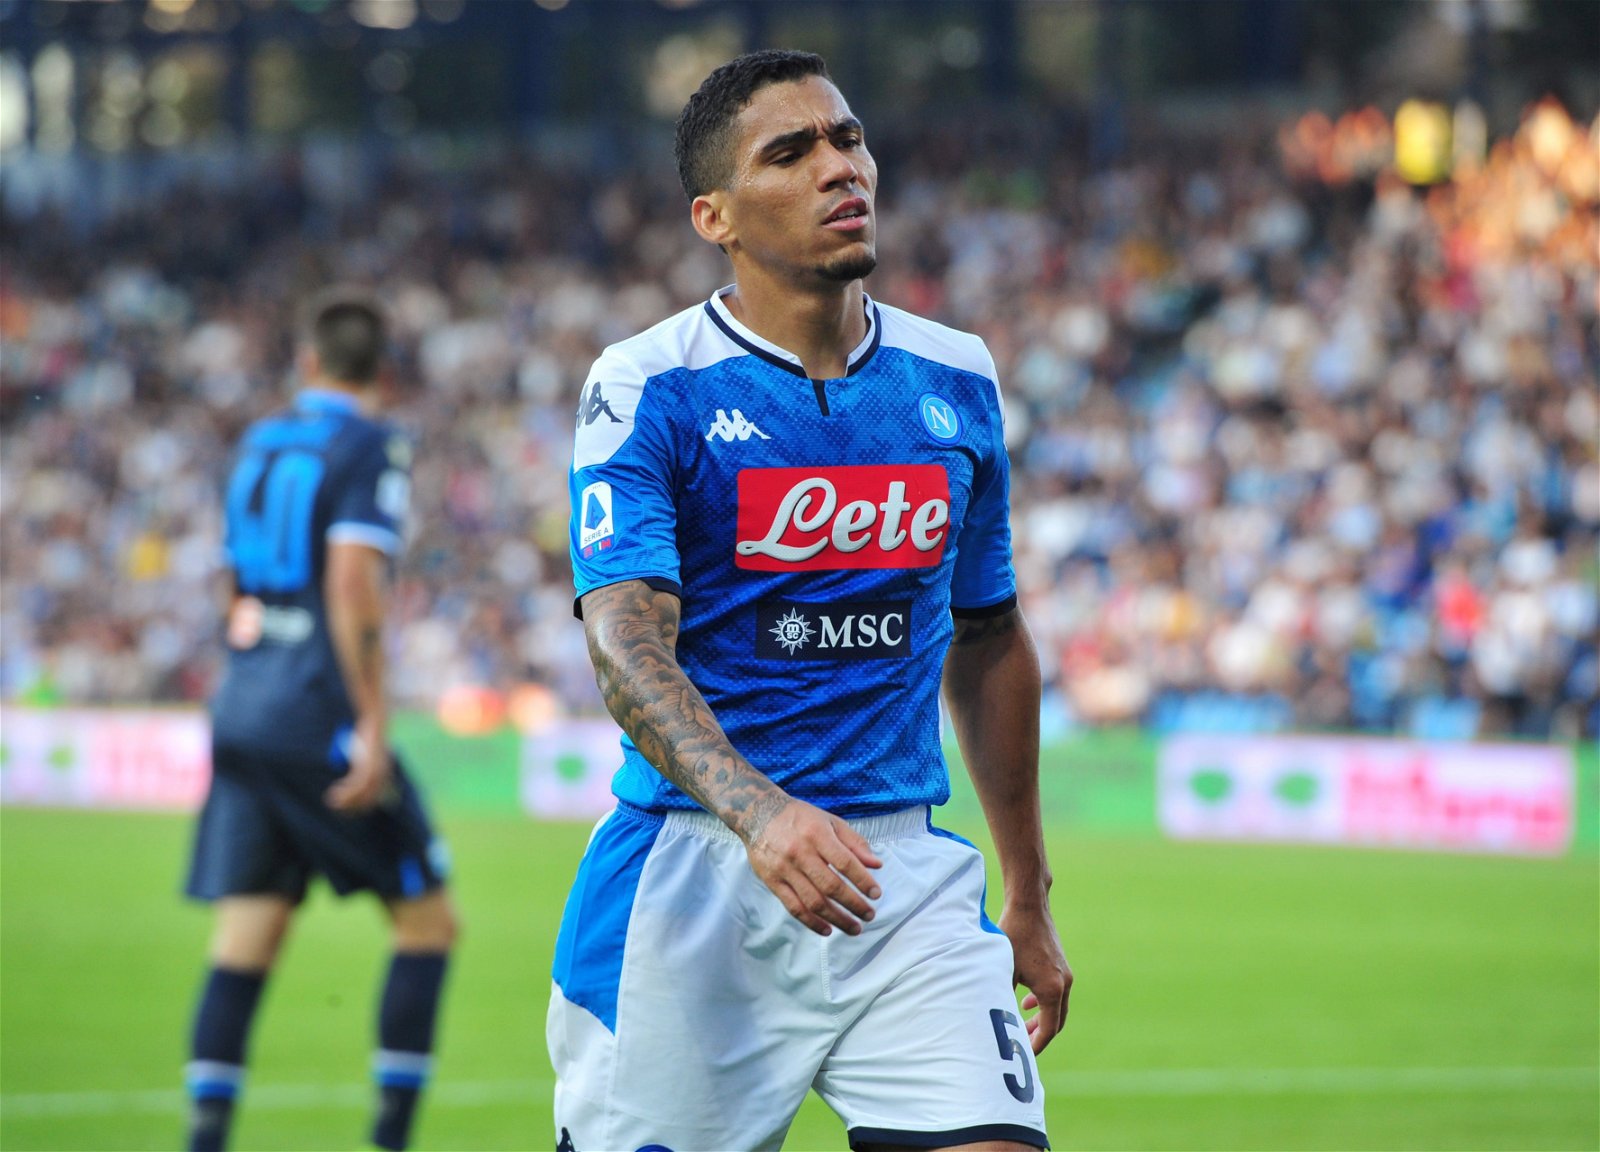 Napoli midfielder Allan out of action with knee injury against Atalanta